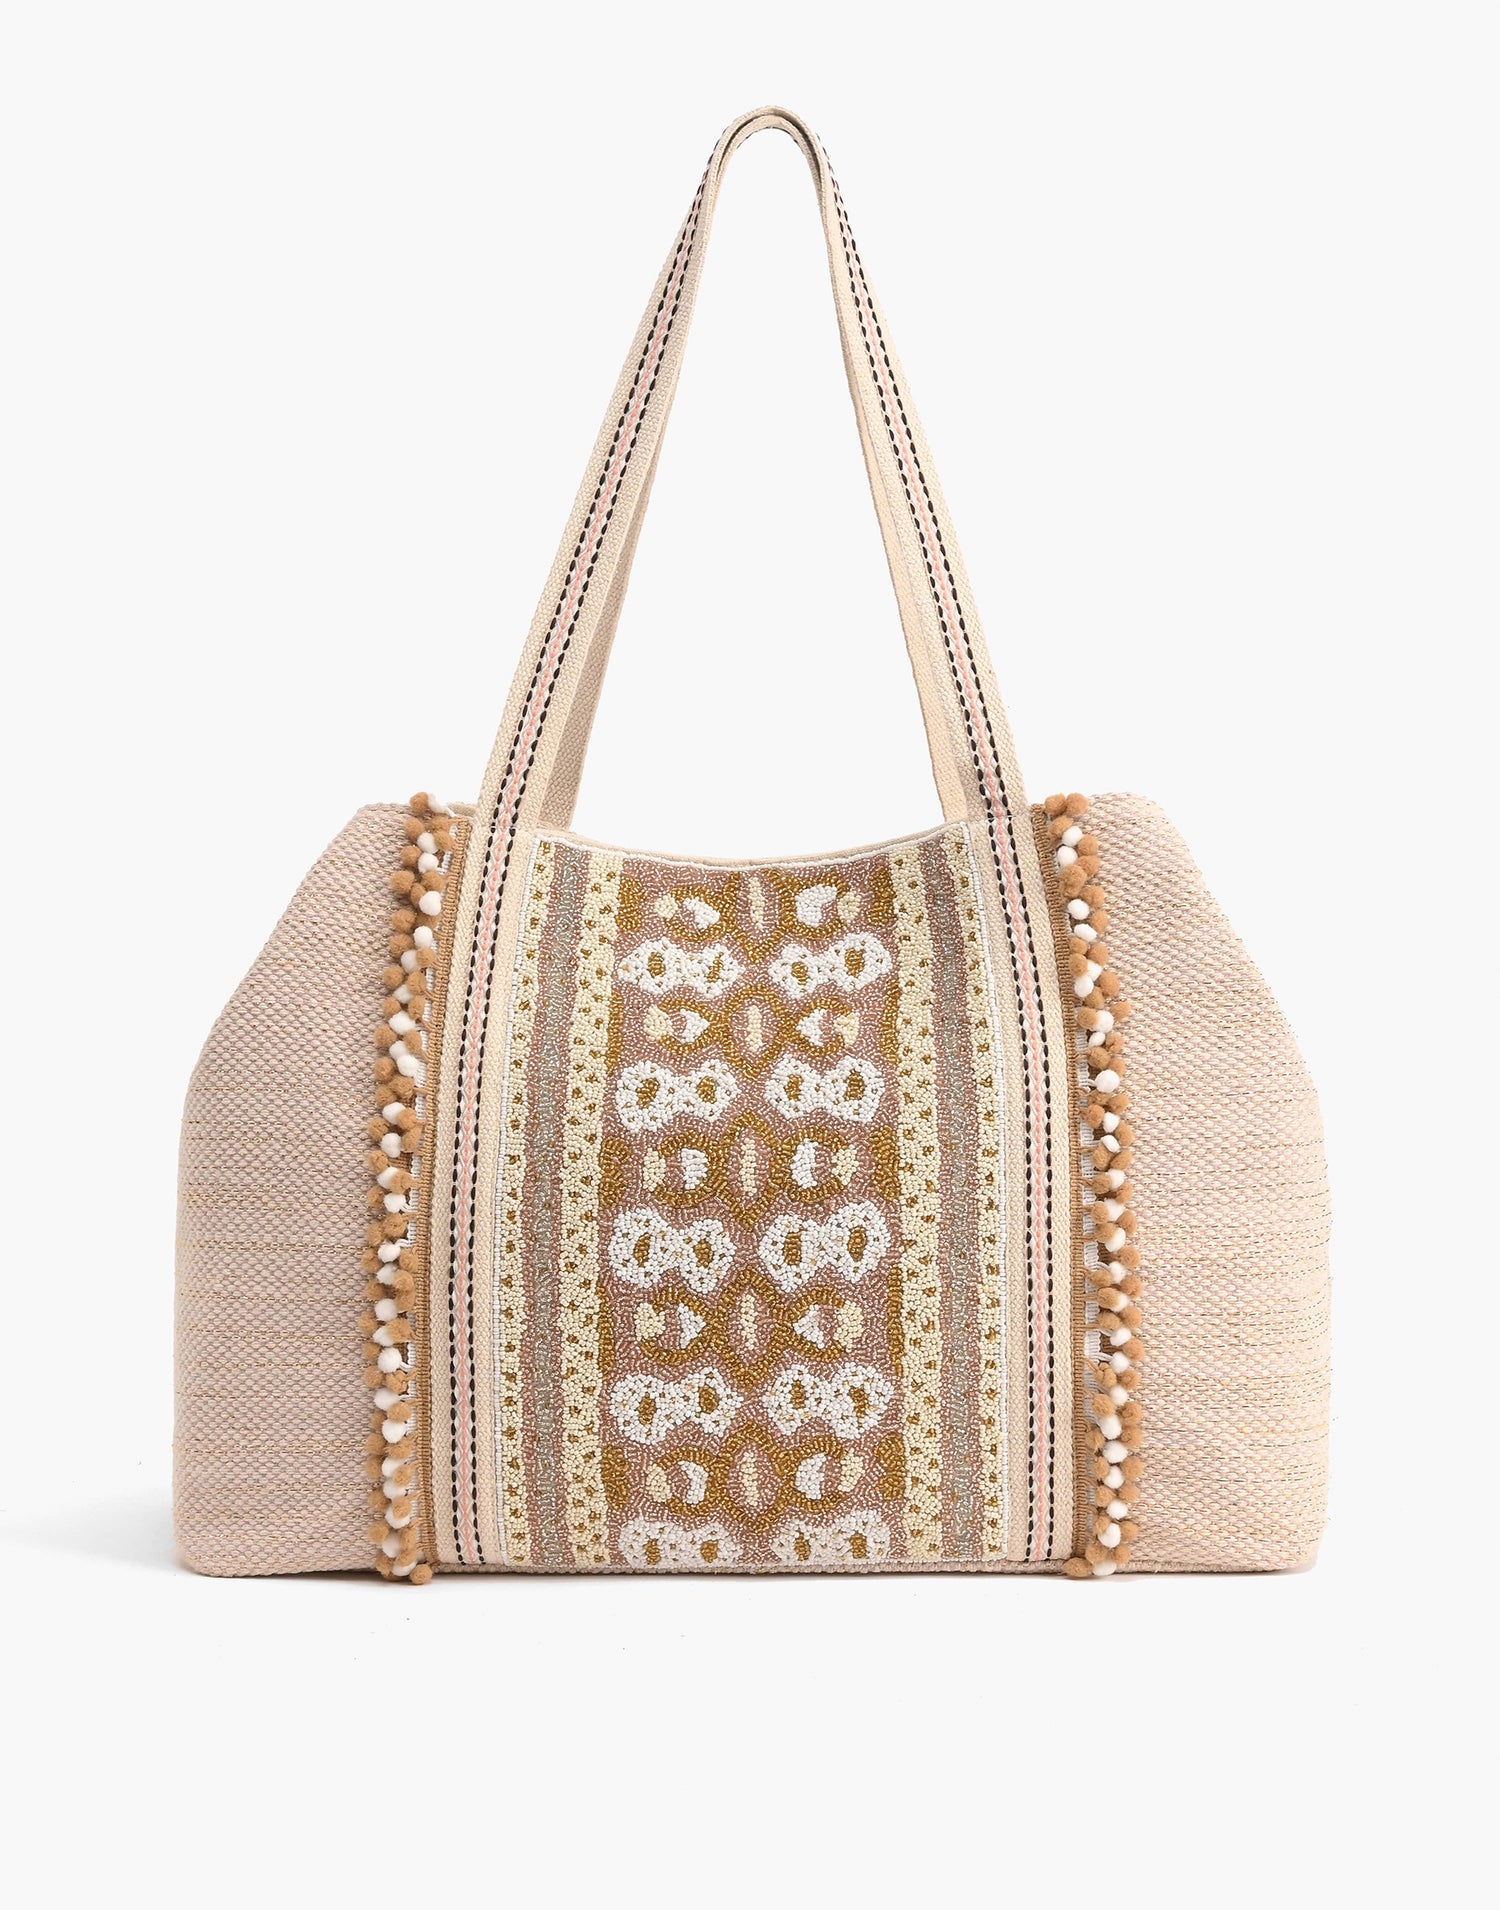 Wild Nights Embellished Tote by America & Beyond - Product View